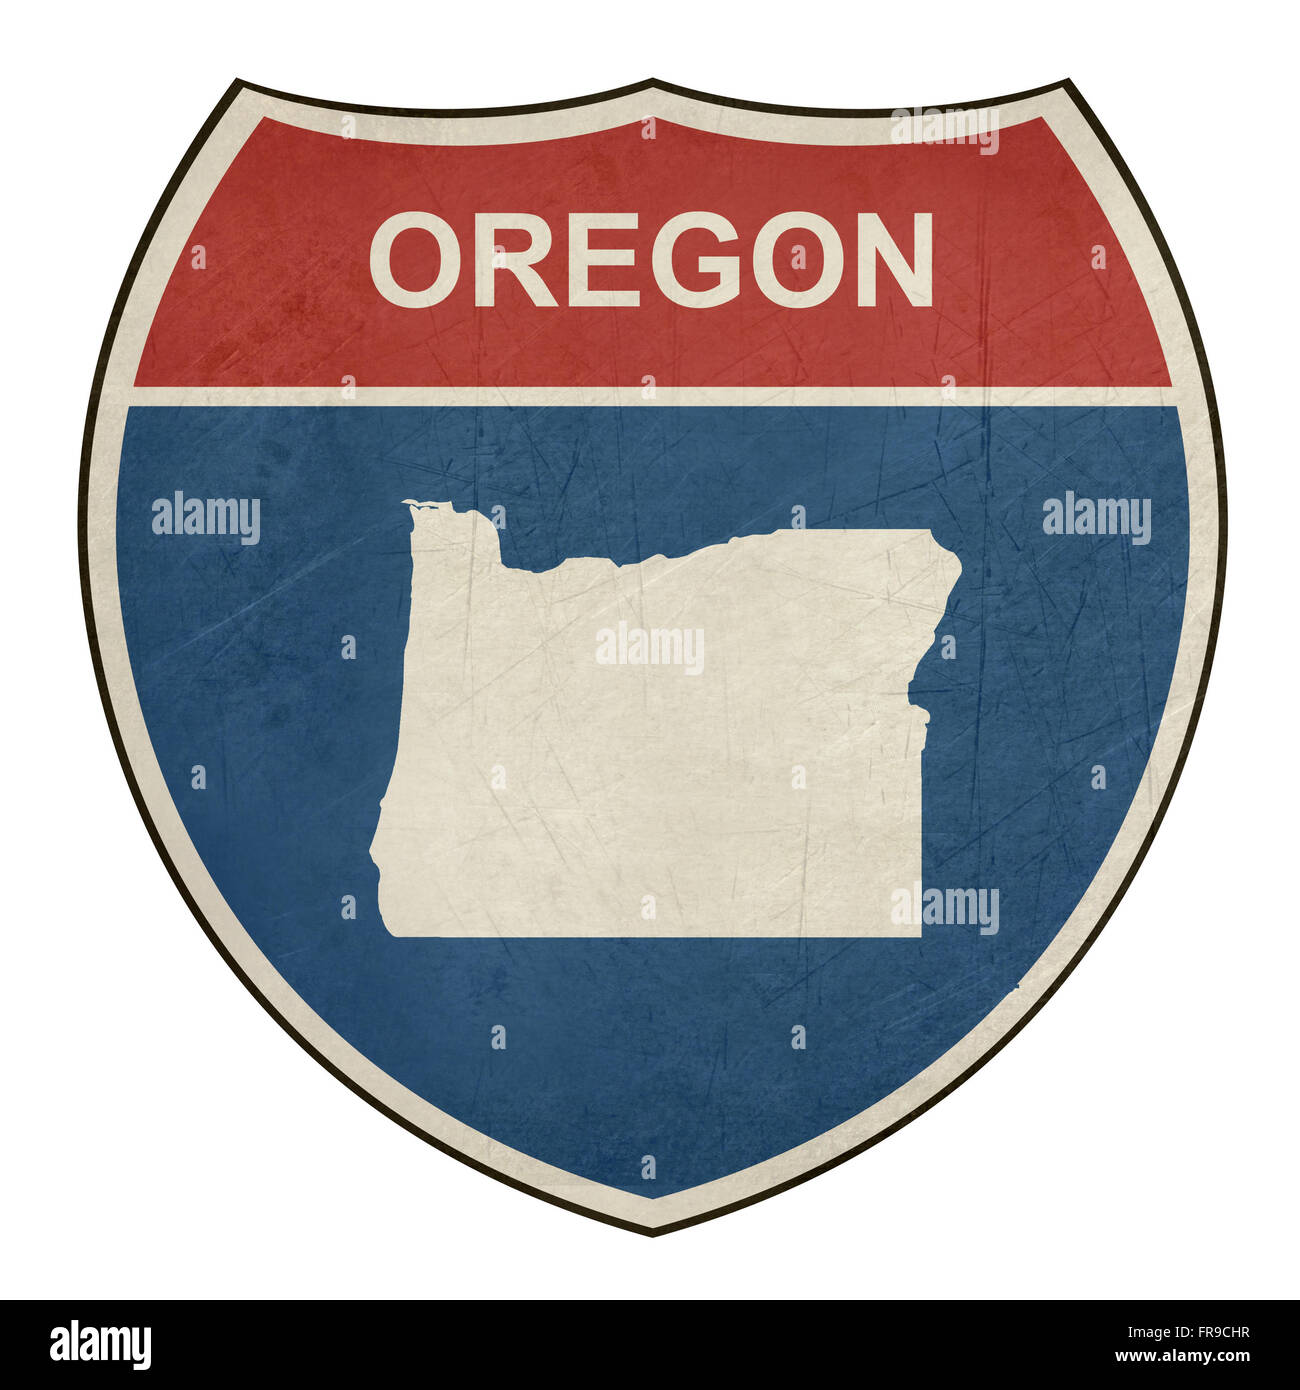 Grunge Oregon American interstate highway road shield isolated on a white background. Stock Photo